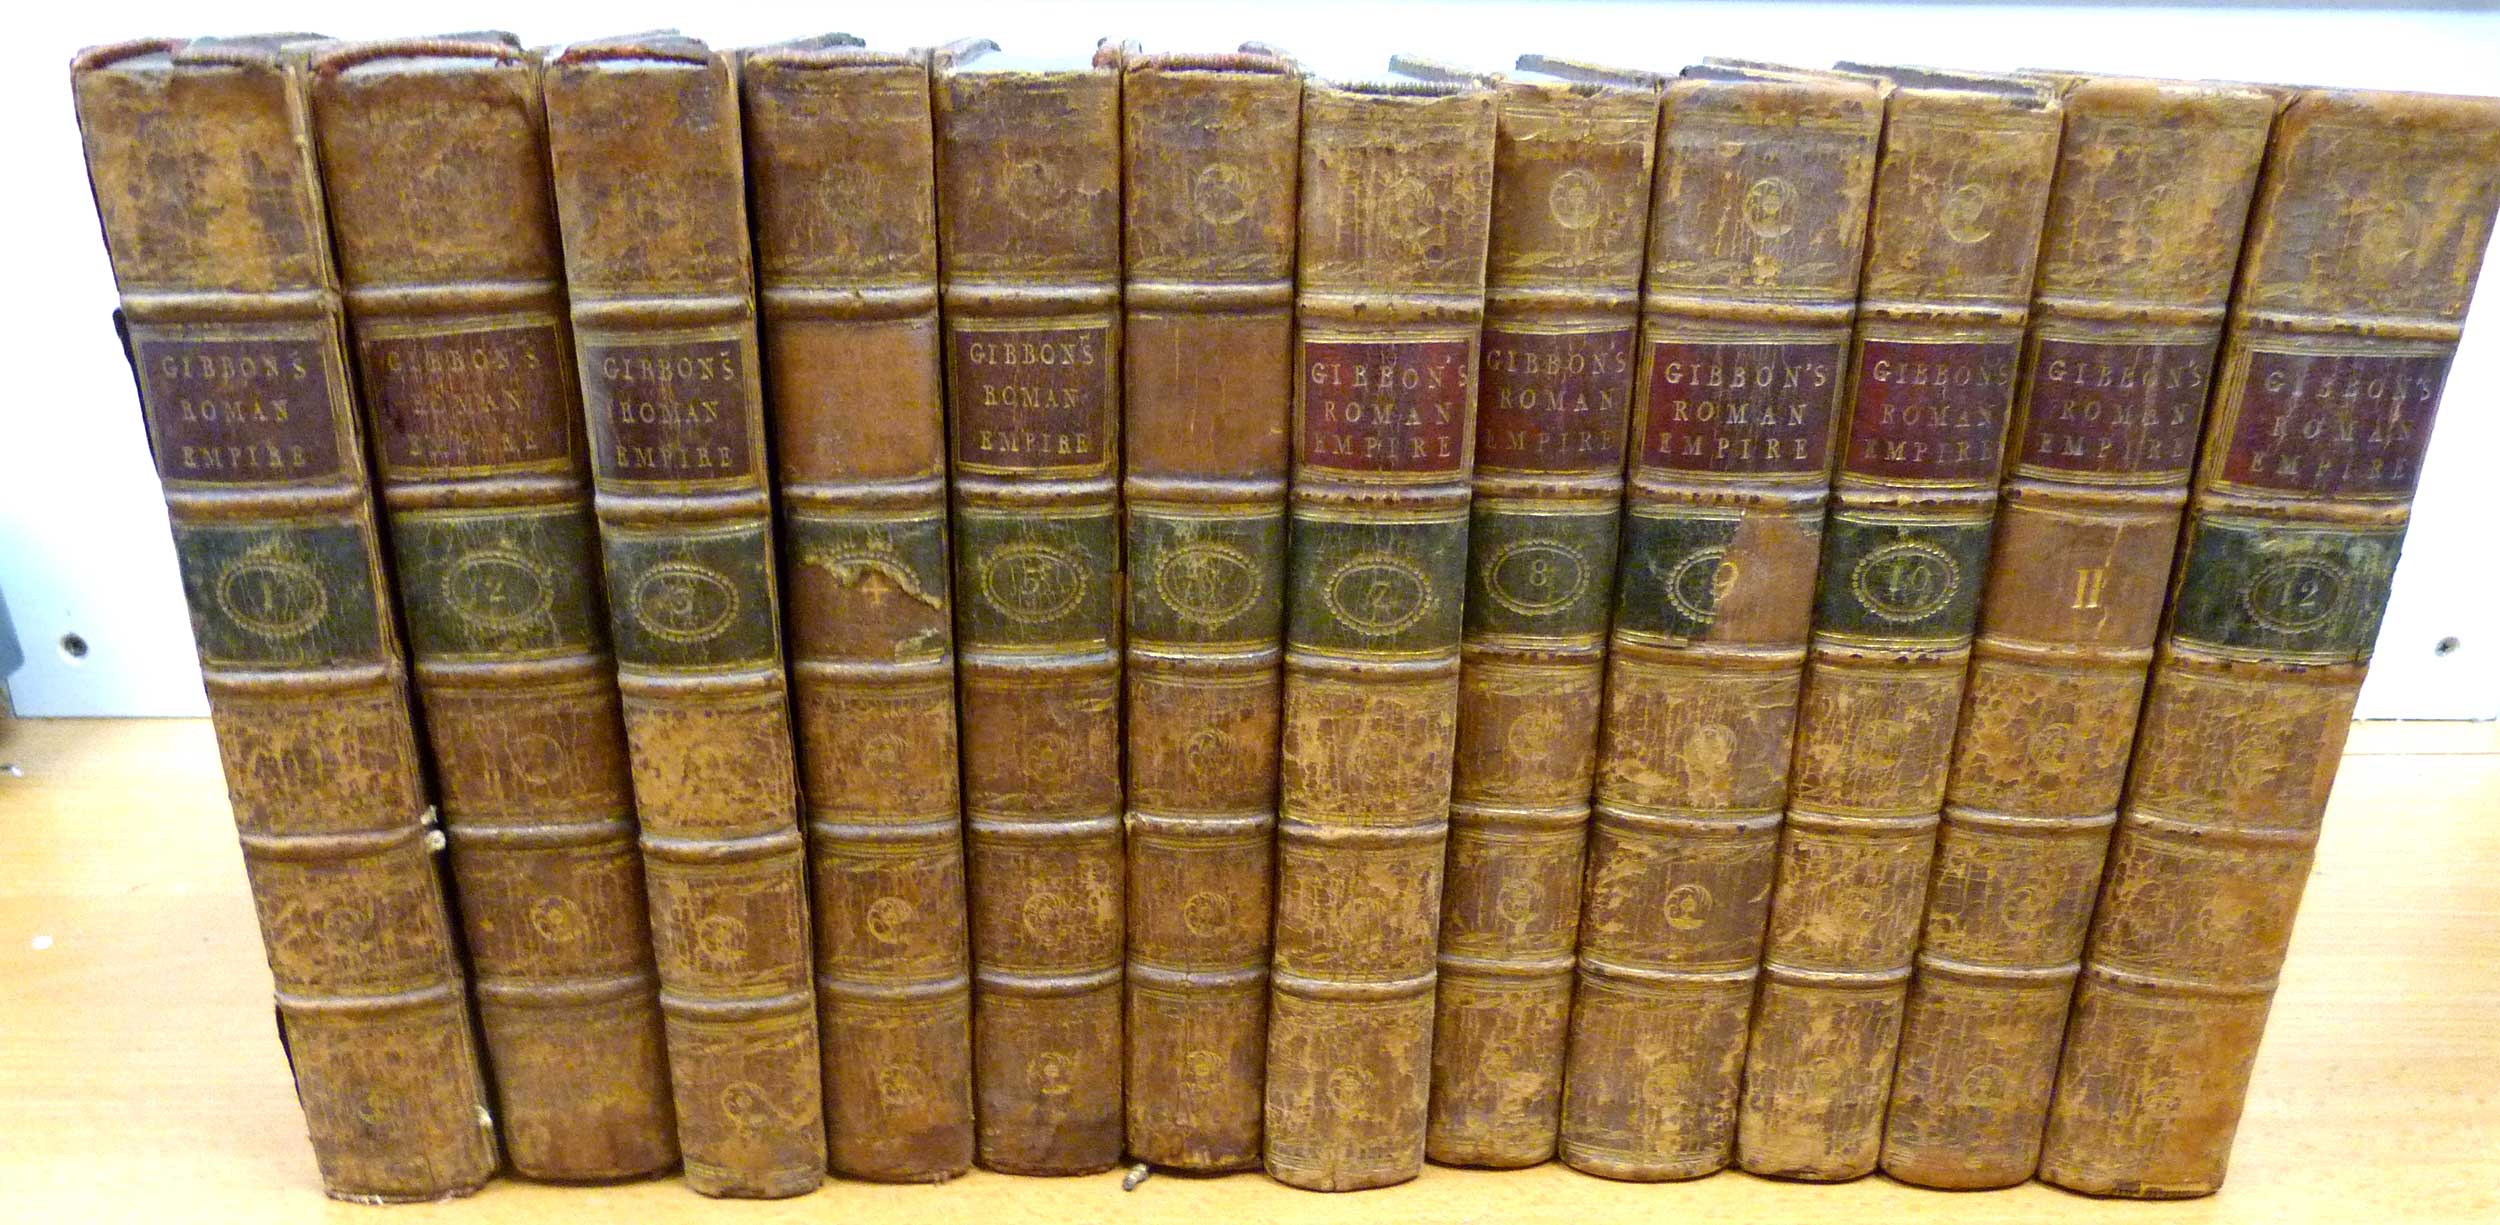 The Decline and Fall of the Roman Empire. 12 volume set. Strahan & Cadell edition. 1783.